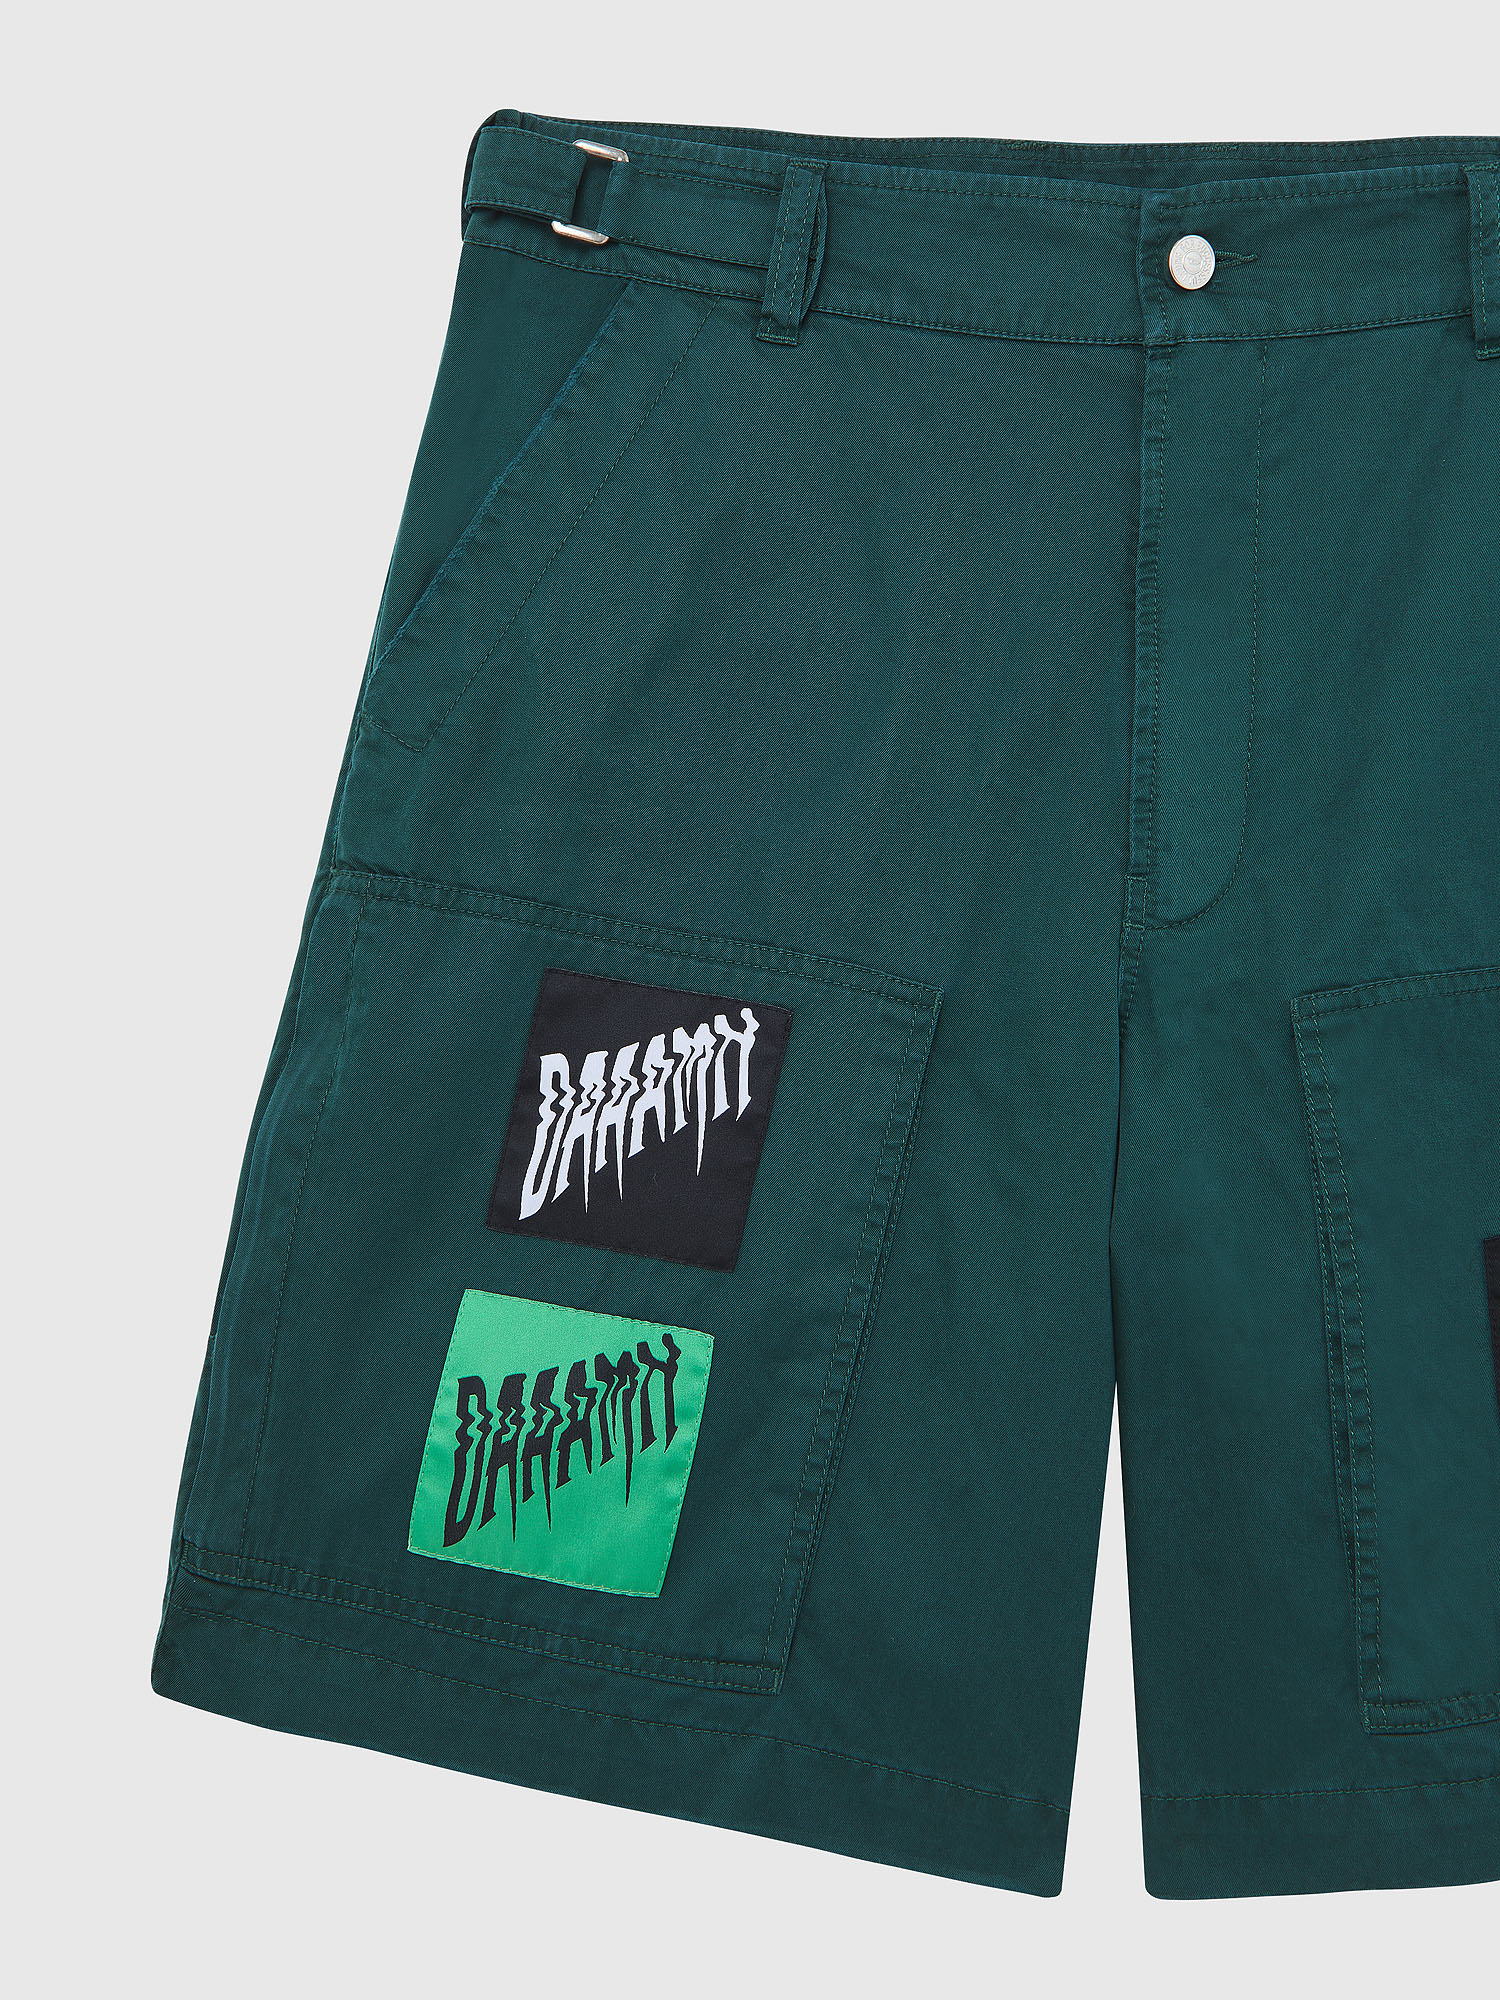 P-DUGA-SHO Man: Twill shorts with graphic patches | Diesel